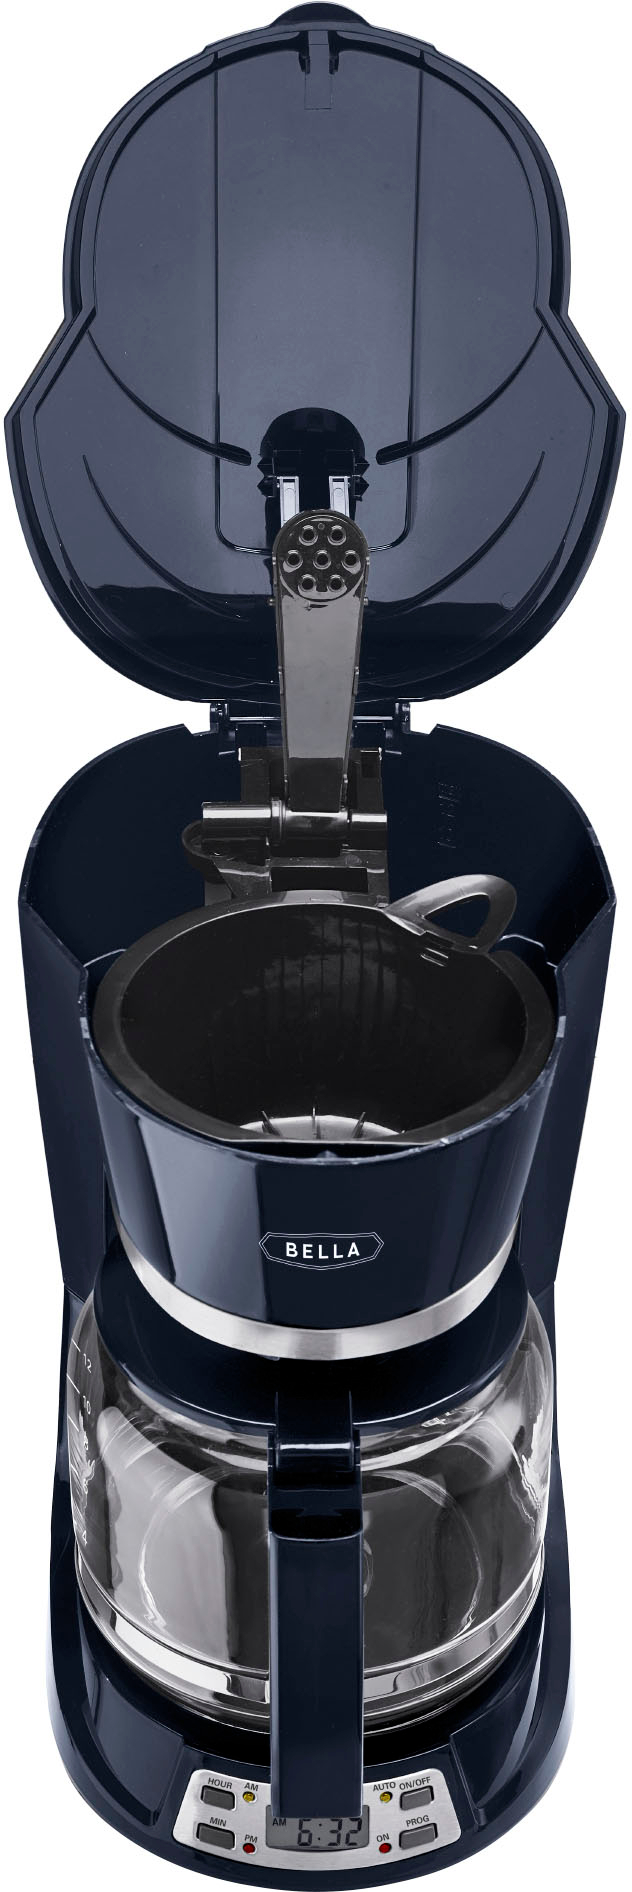 Angle View: Bella - 12-Cup Programmable Coffee Maker - Ink Blue